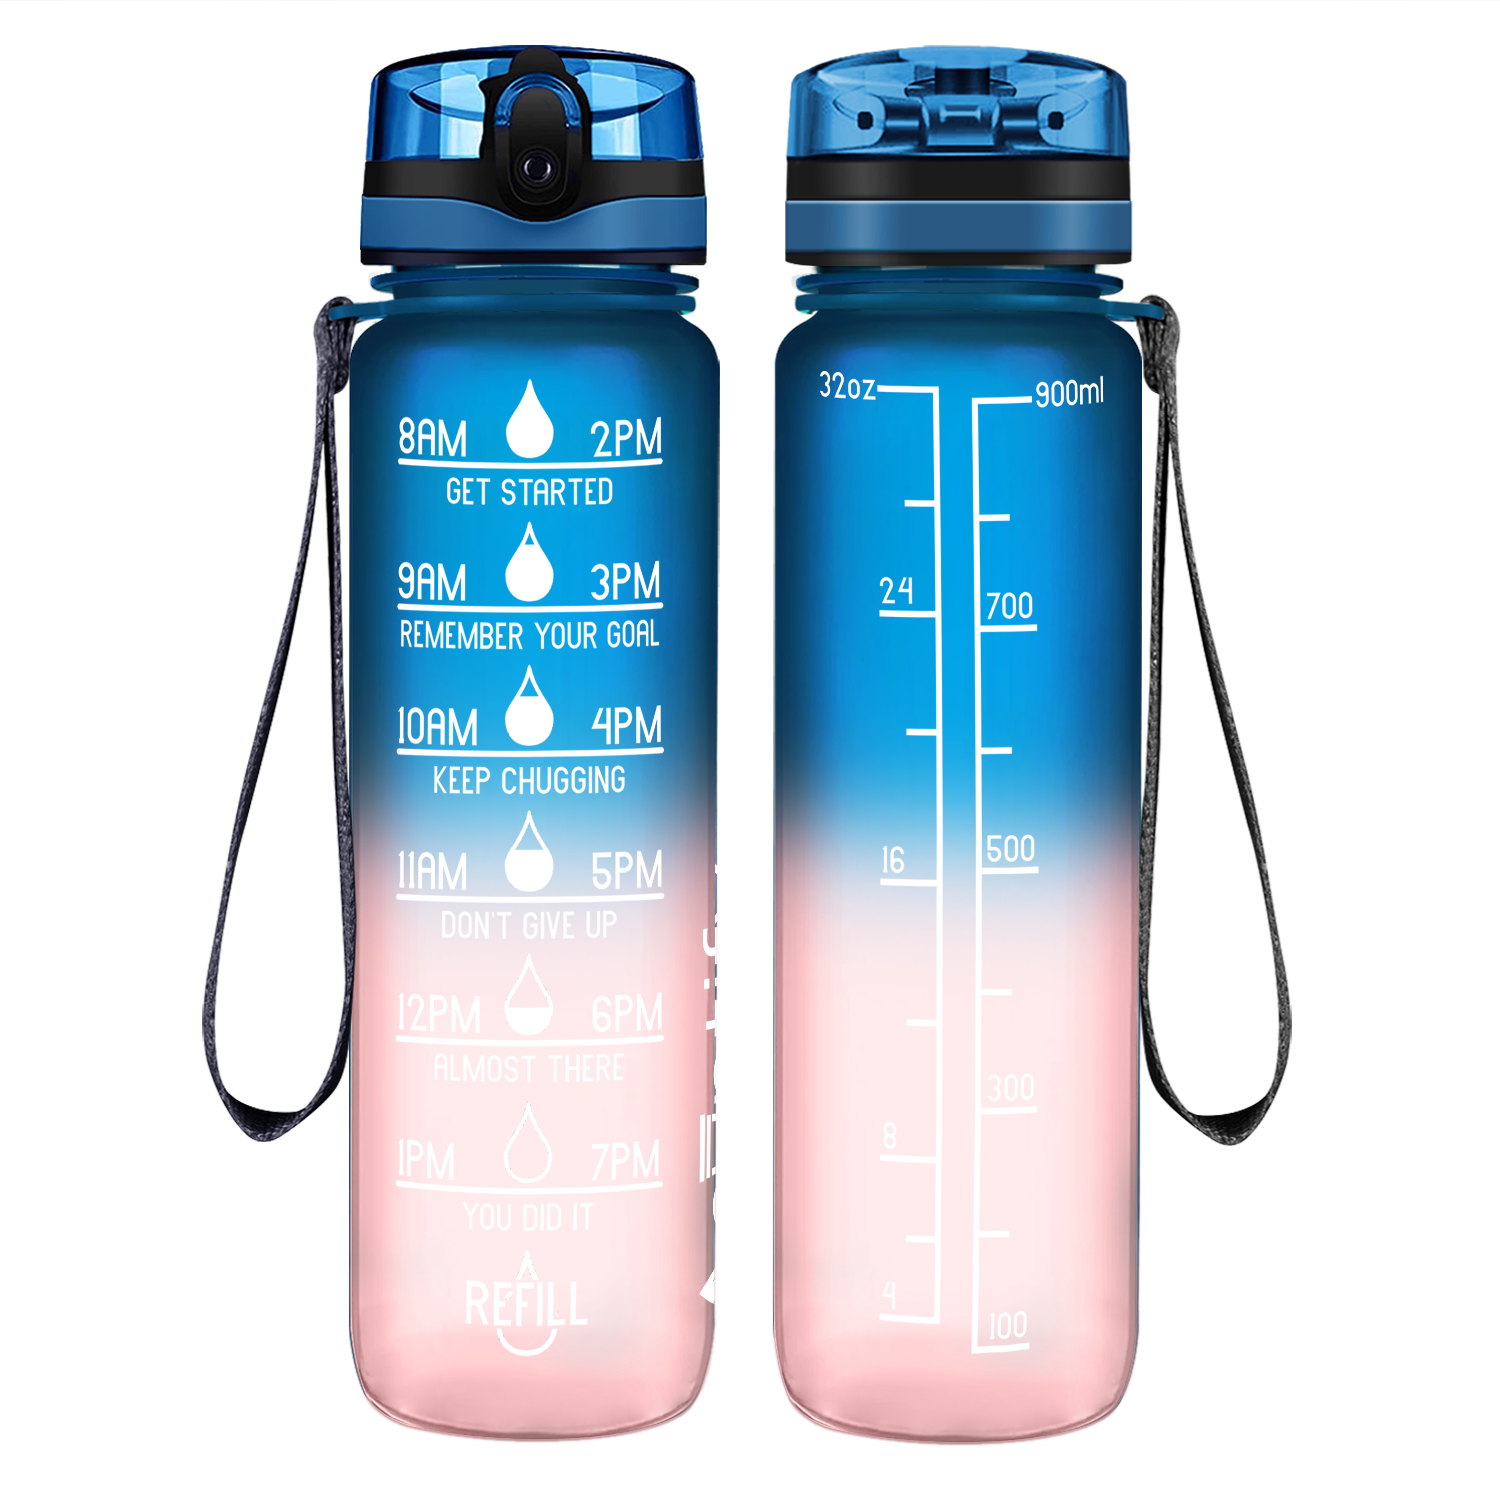 Cuptify Bubble Gum Frosted Motivational Water Bottle